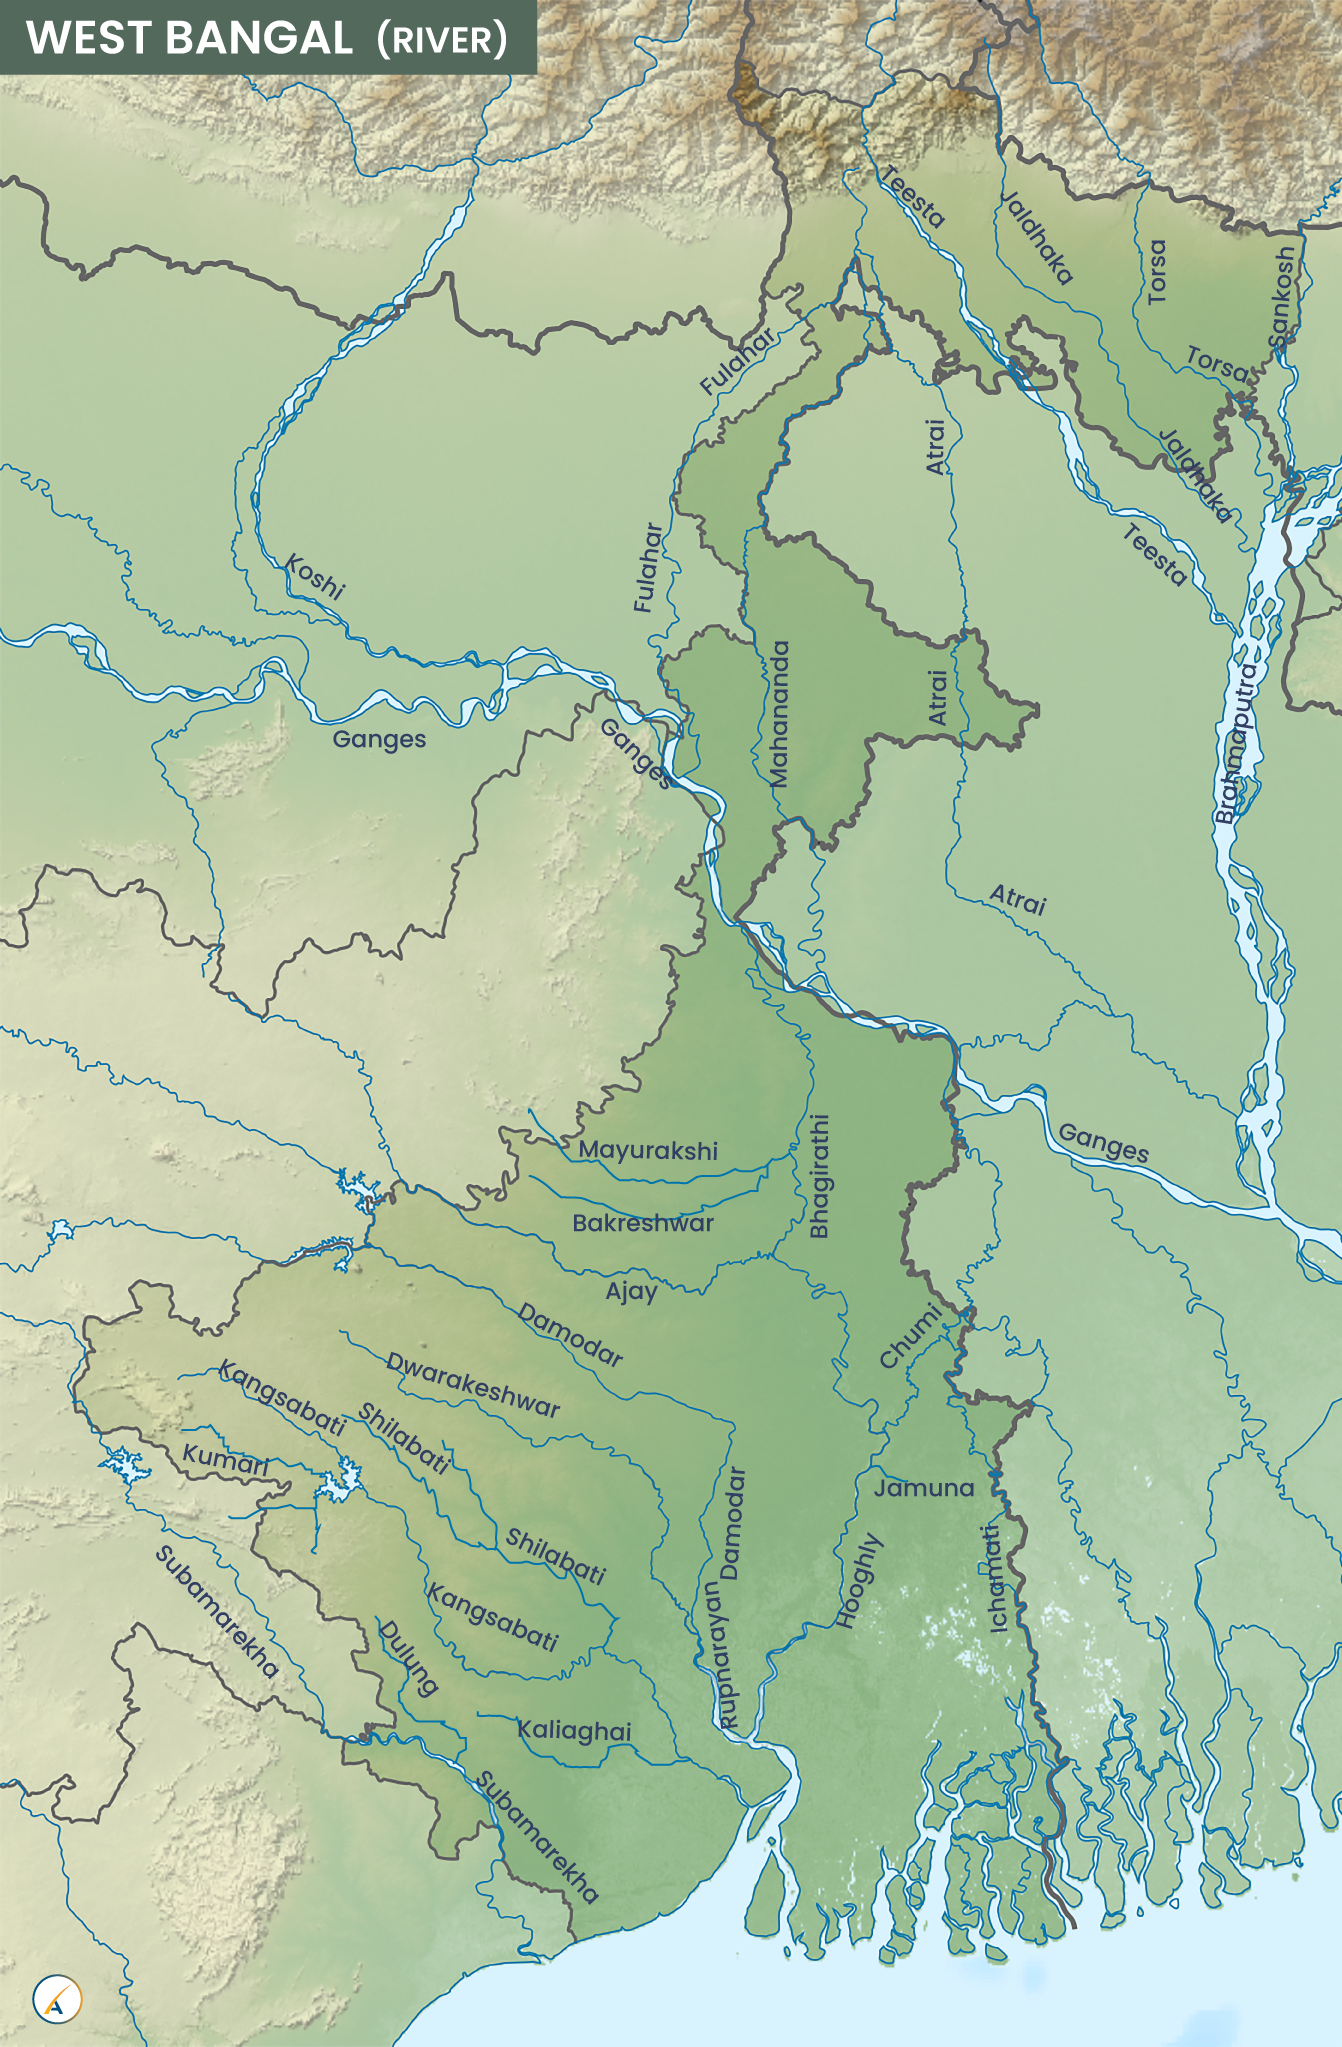 West Bengal River Map